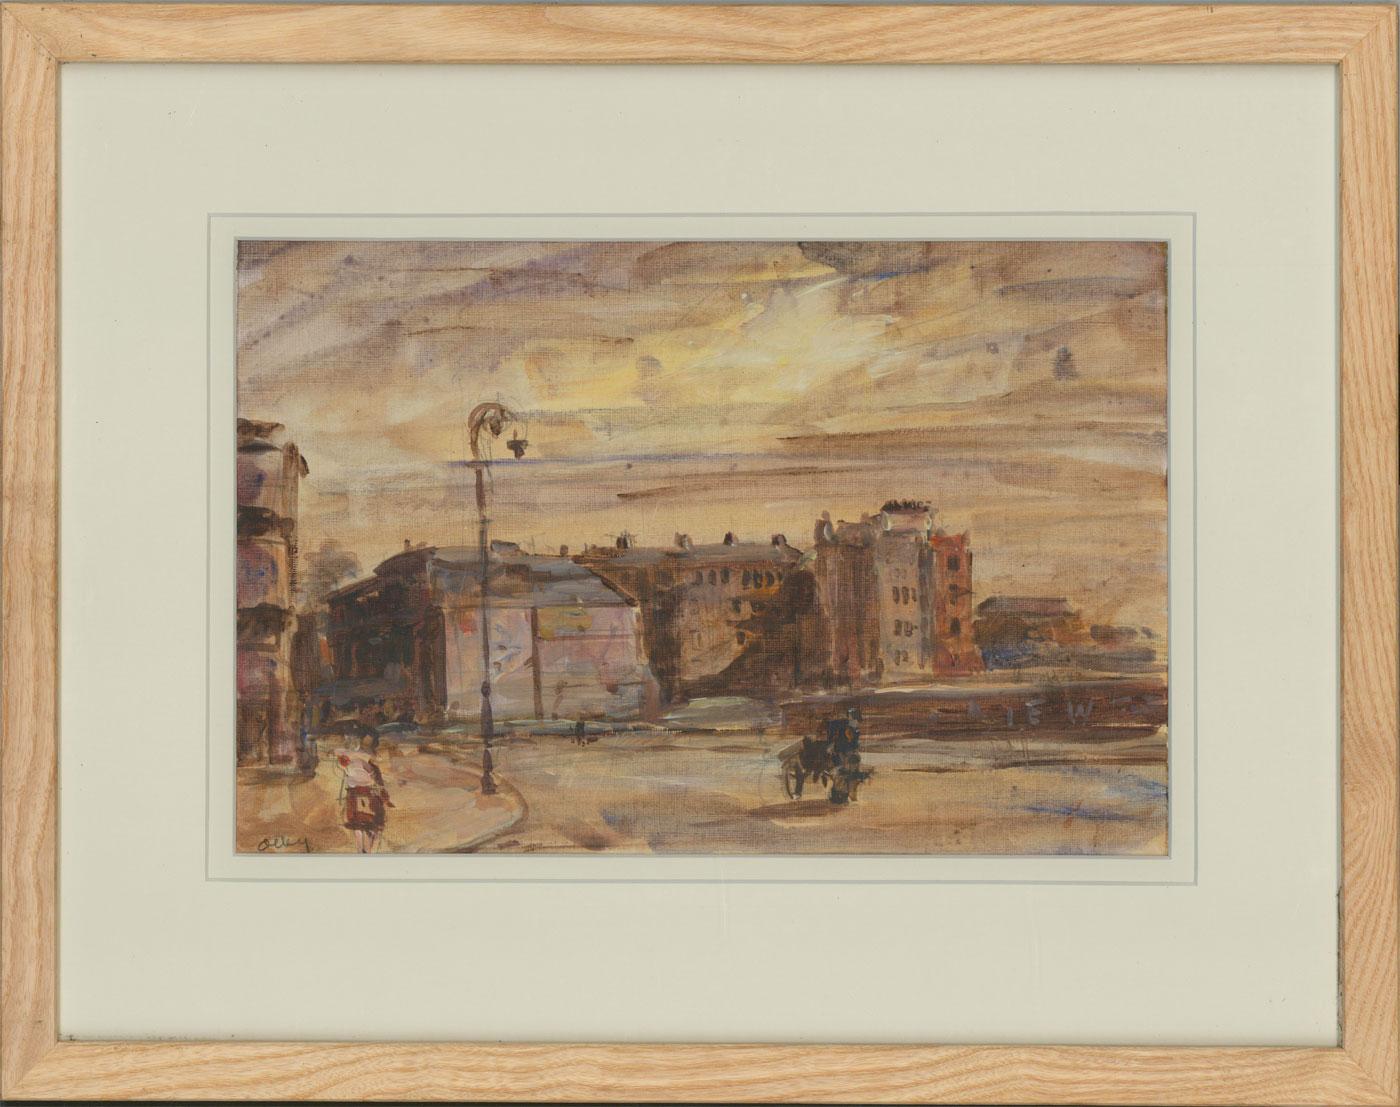 A fine contemporary street scene by listed artist Ronald Olley. Here the artist has captured an urban street with large town houses and various figures. Completed in washes of muted colour emphasizing the urban atmosphere of this composition.